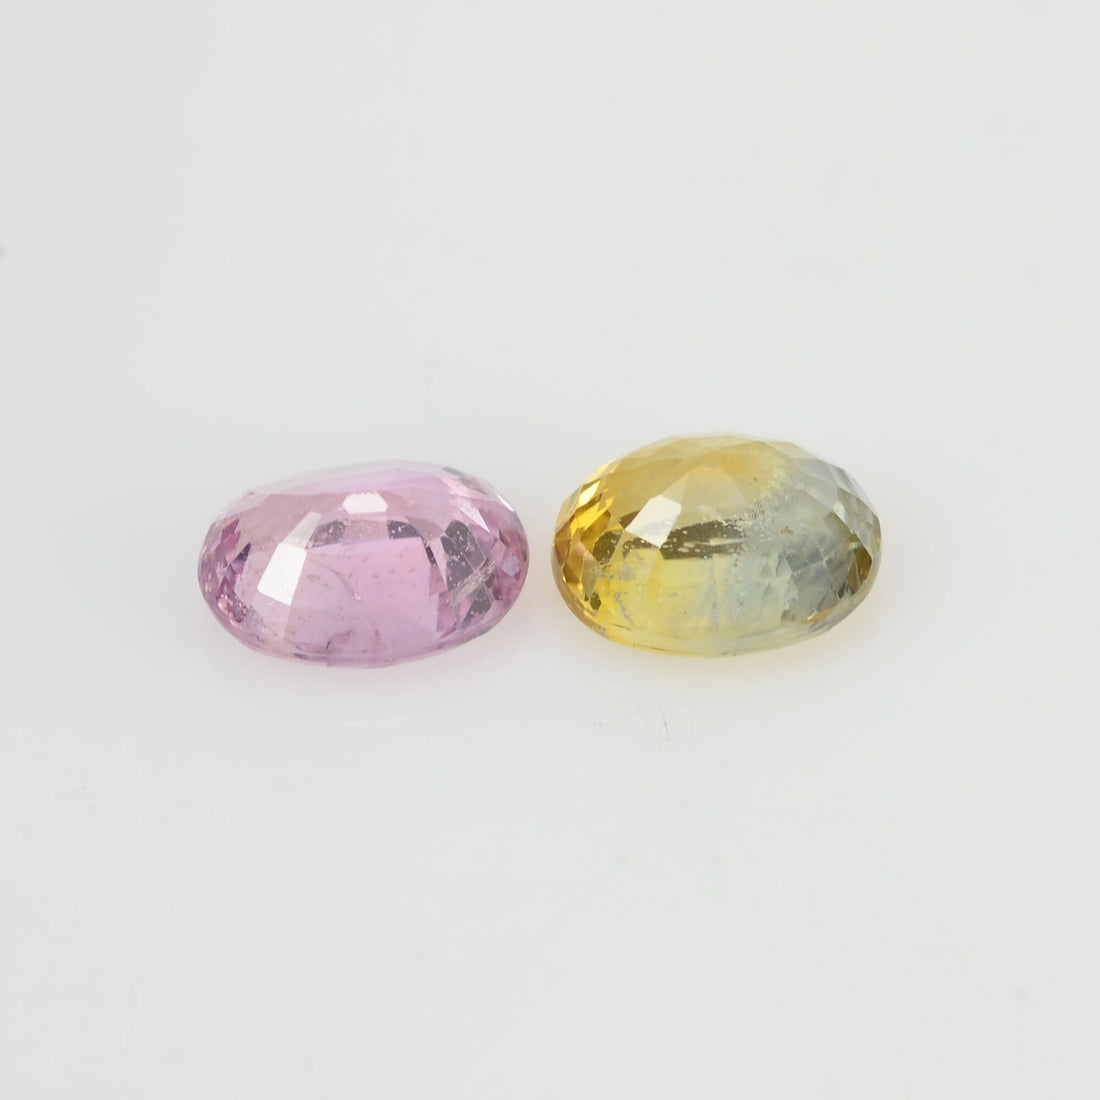 1.64 cts Natural Fancy Sapphire Loose Pair Gemstone Oval Cut